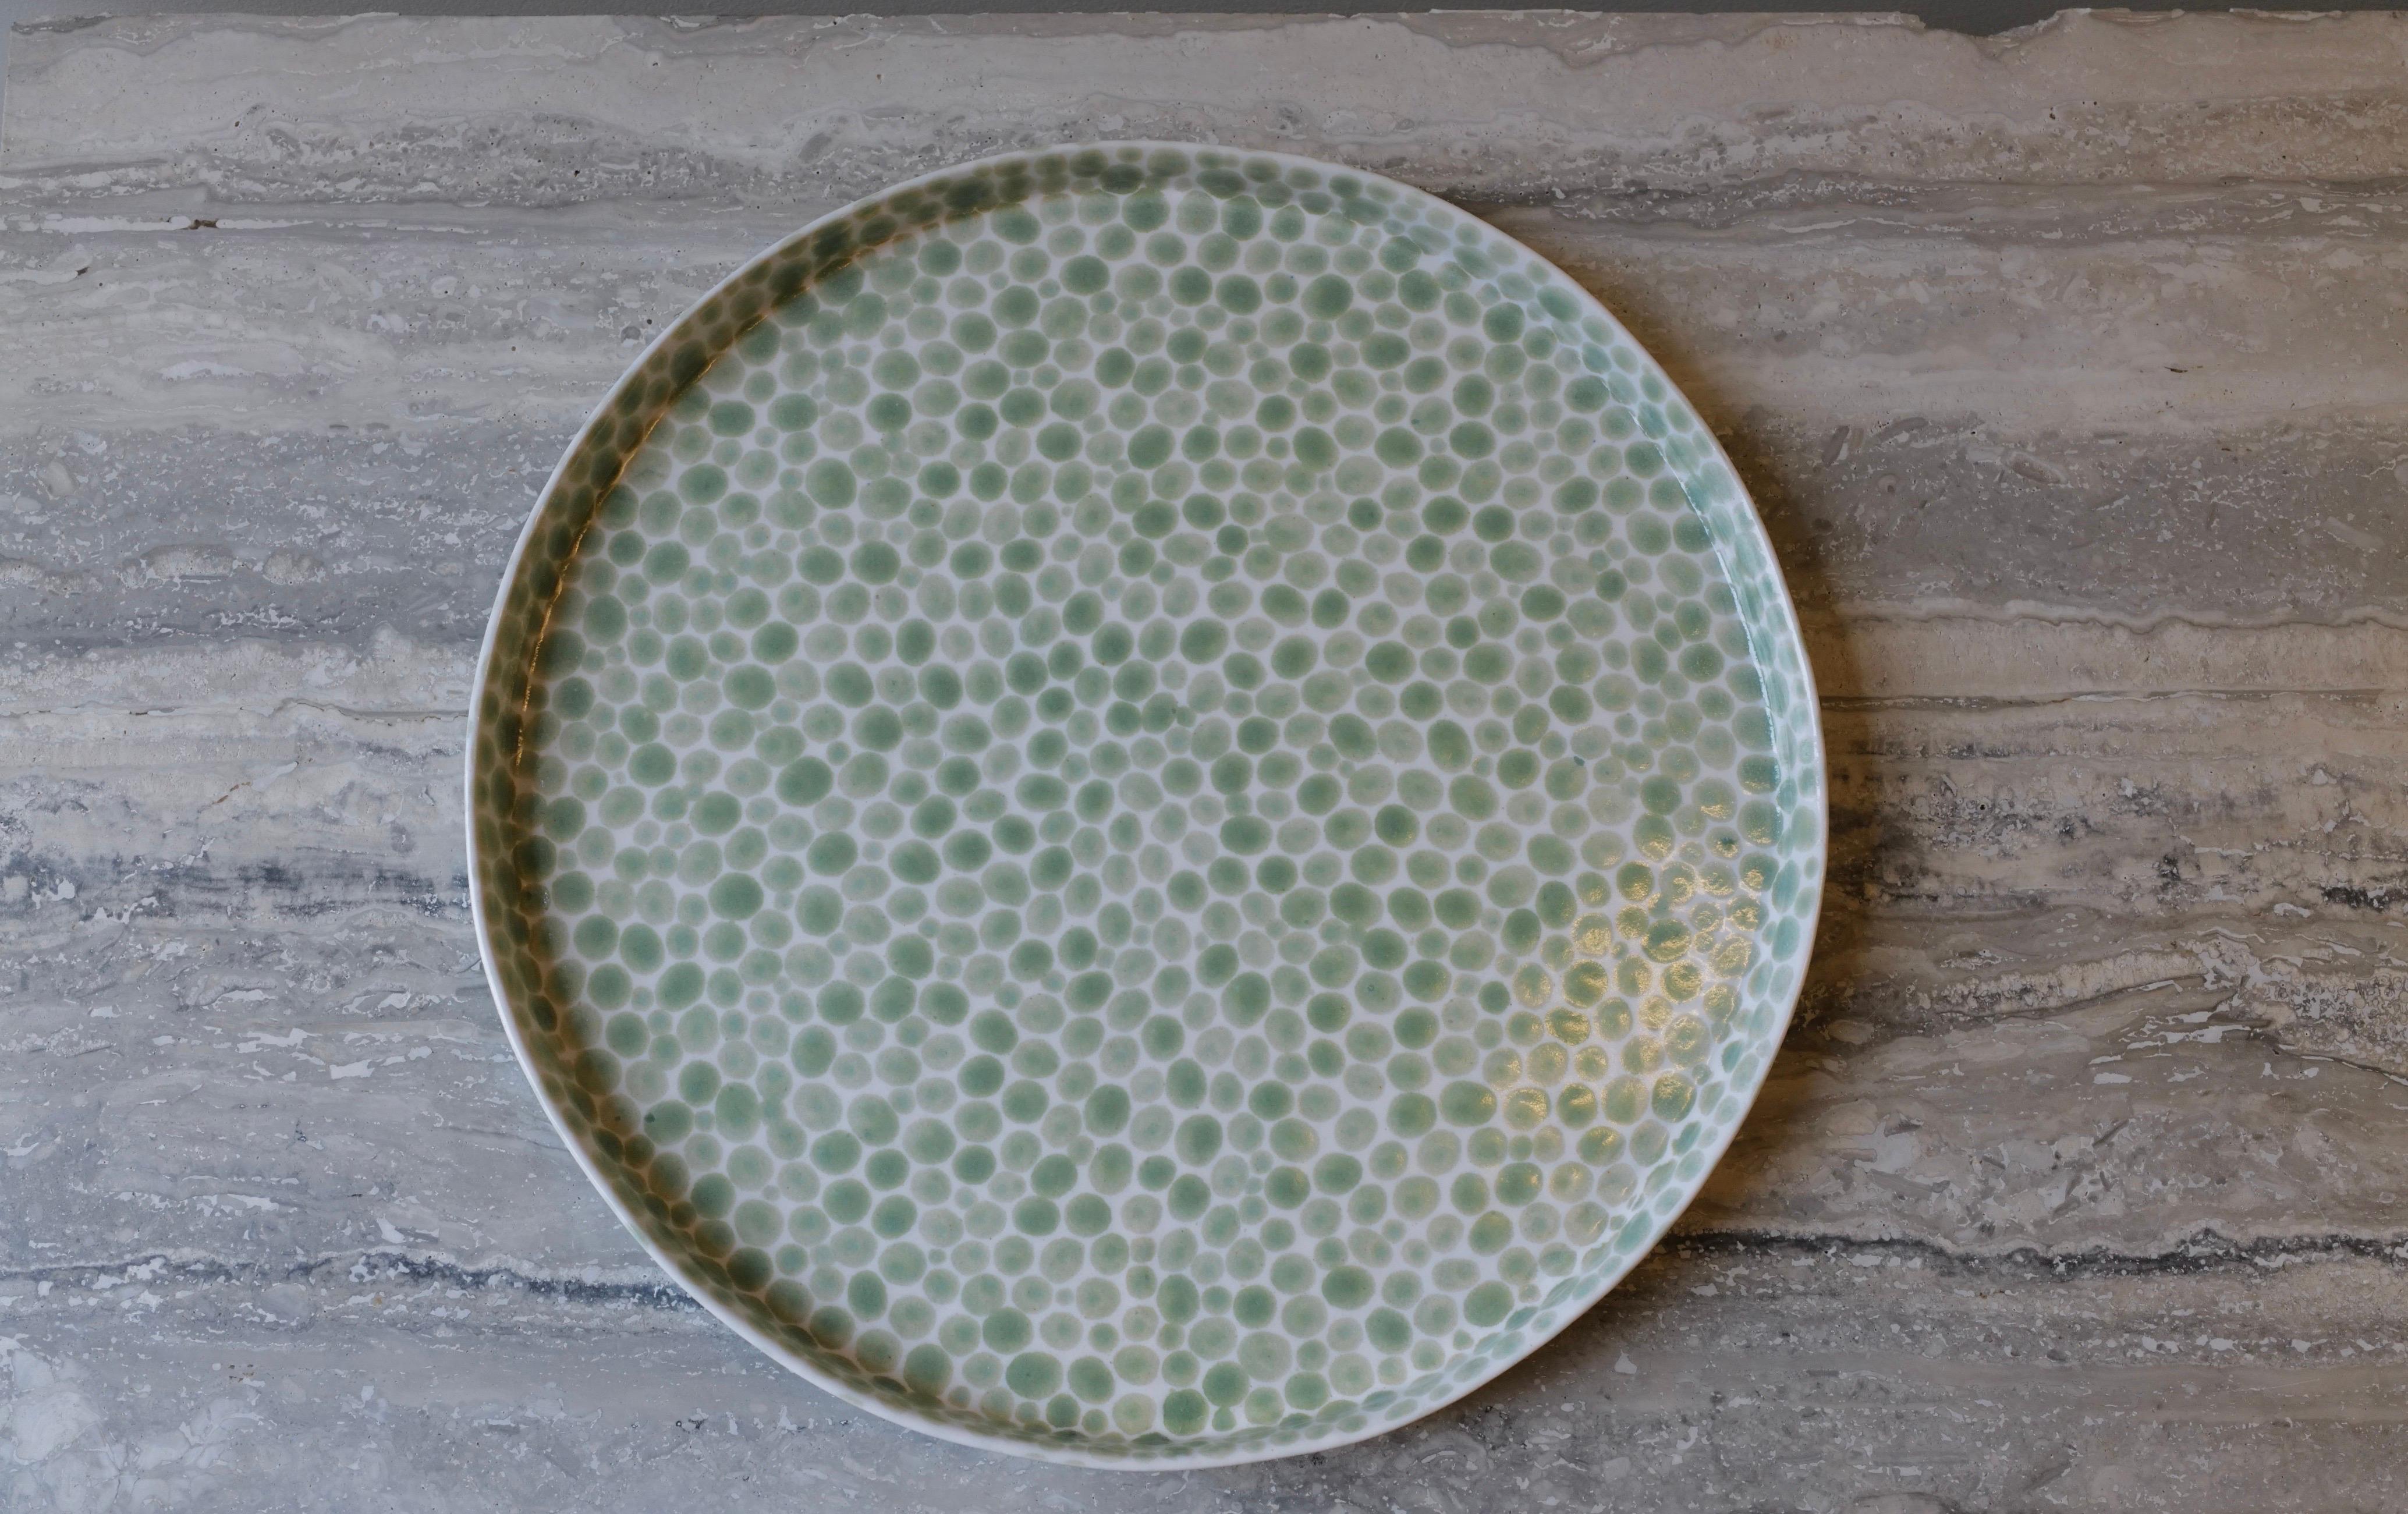 Large ceramic tray or serving platter. Hand-cast in porcelain and once bisque fired, each dot is hand-painted with a jade glaze. An unconventional layered glazing technique, developed by the artist, is used in these cast porcelain pieces. The